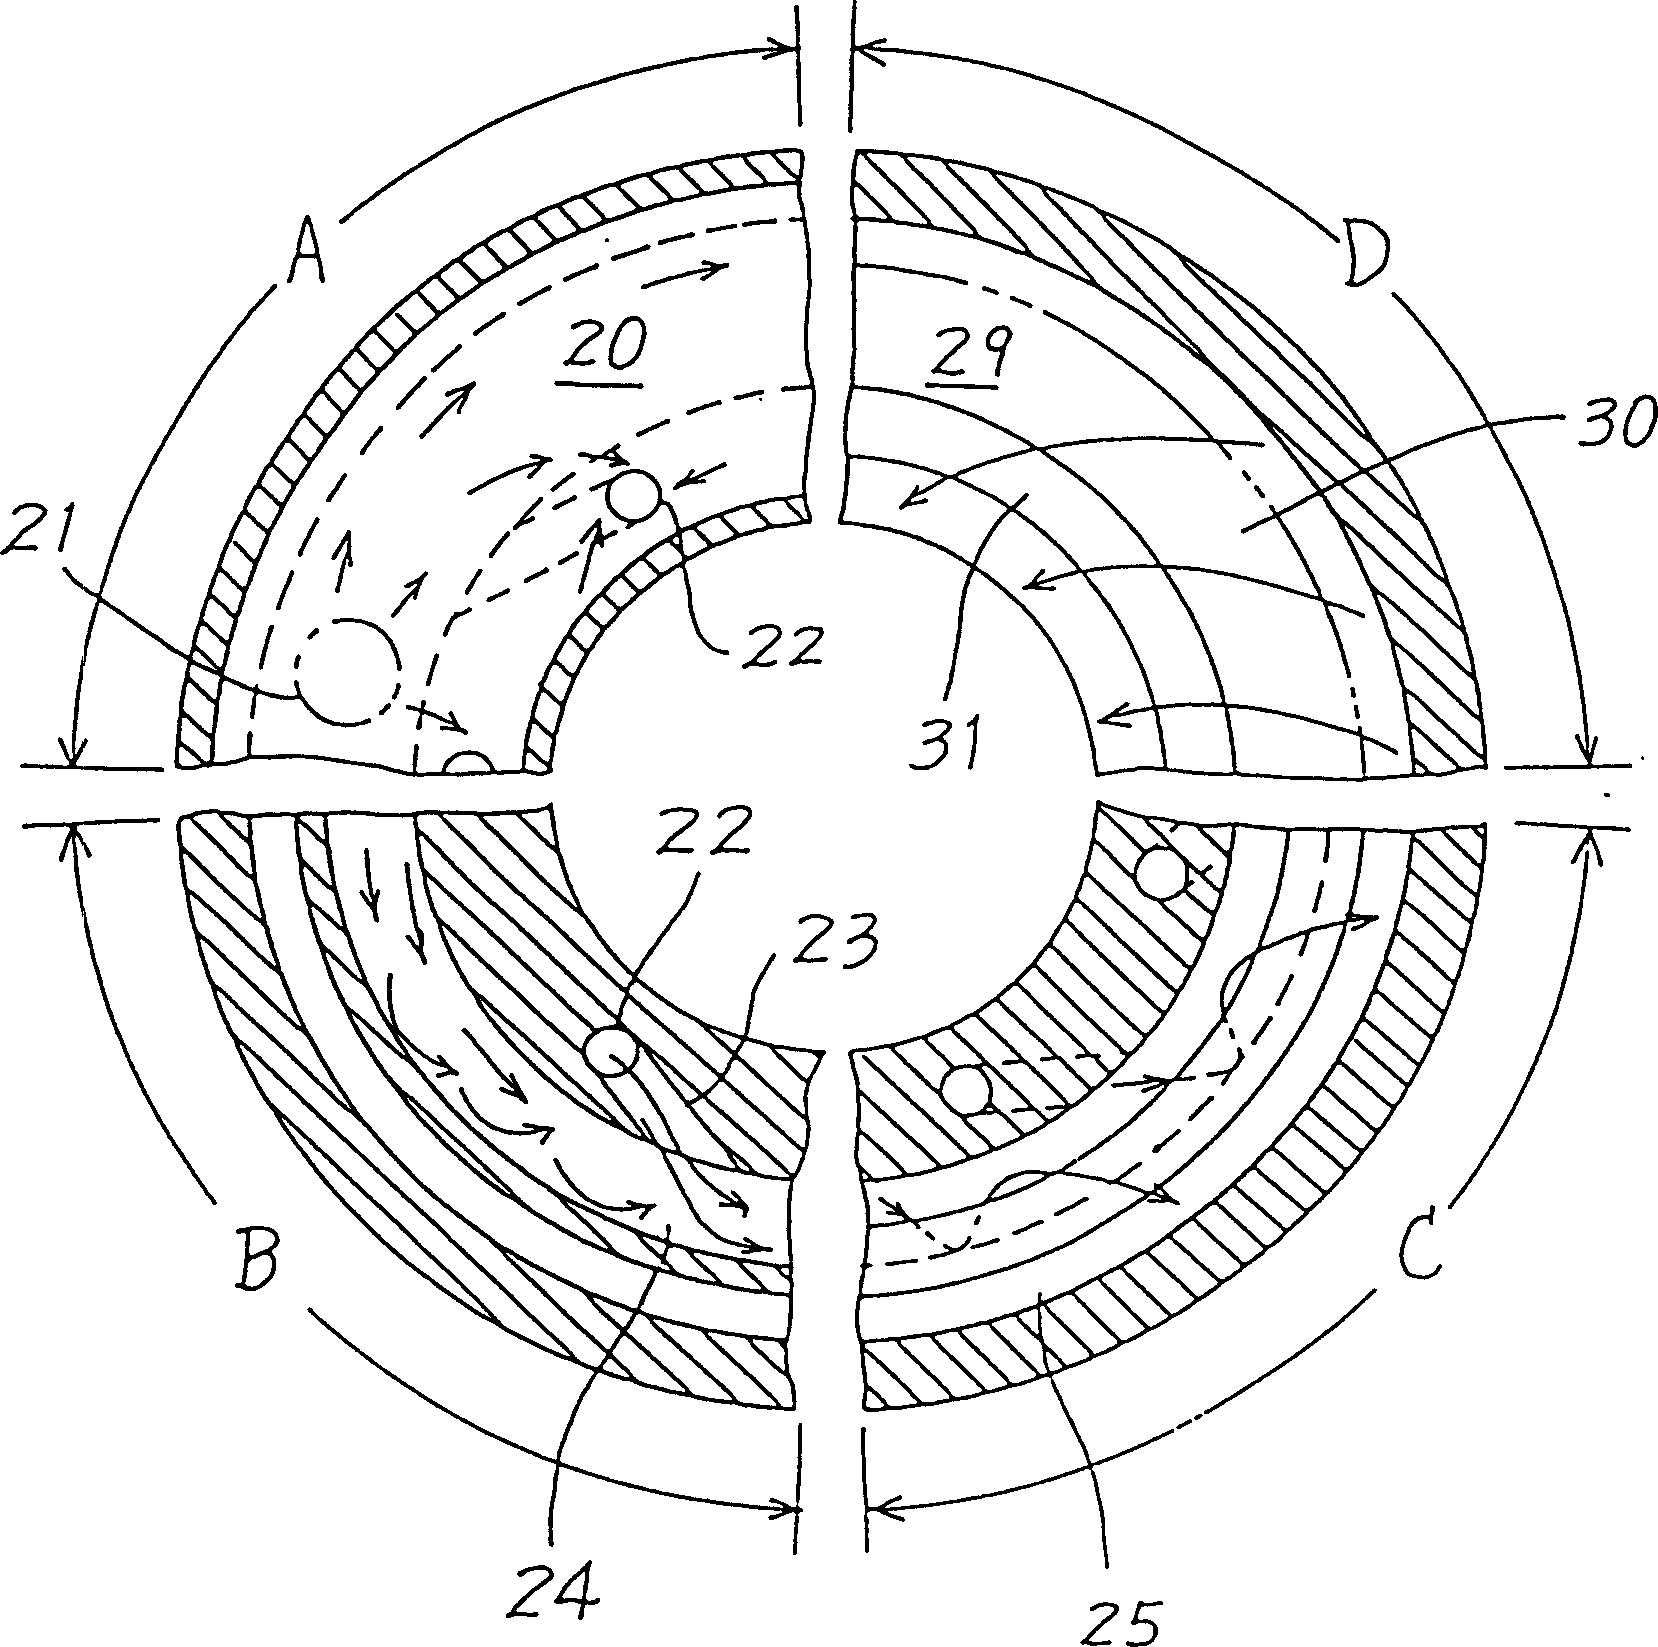 Device for separating and recovering cooling liquid in cutting machine tool and grinder